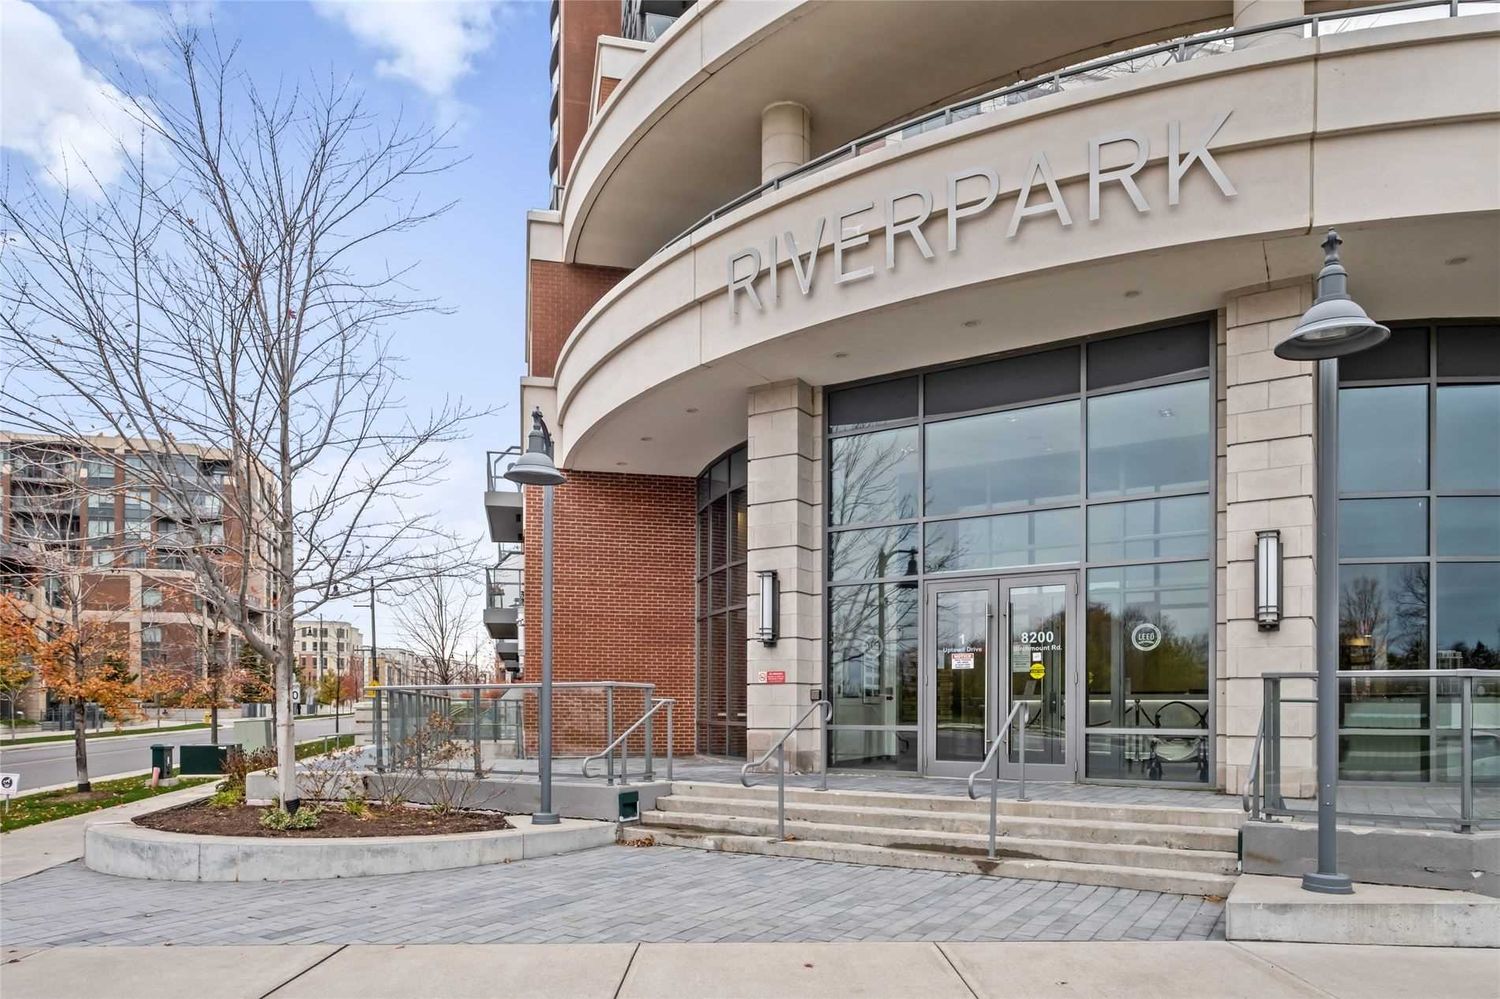 1 Uptown Drive. Riverpark Condos is located in  Markham, Toronto - image #2 of 2